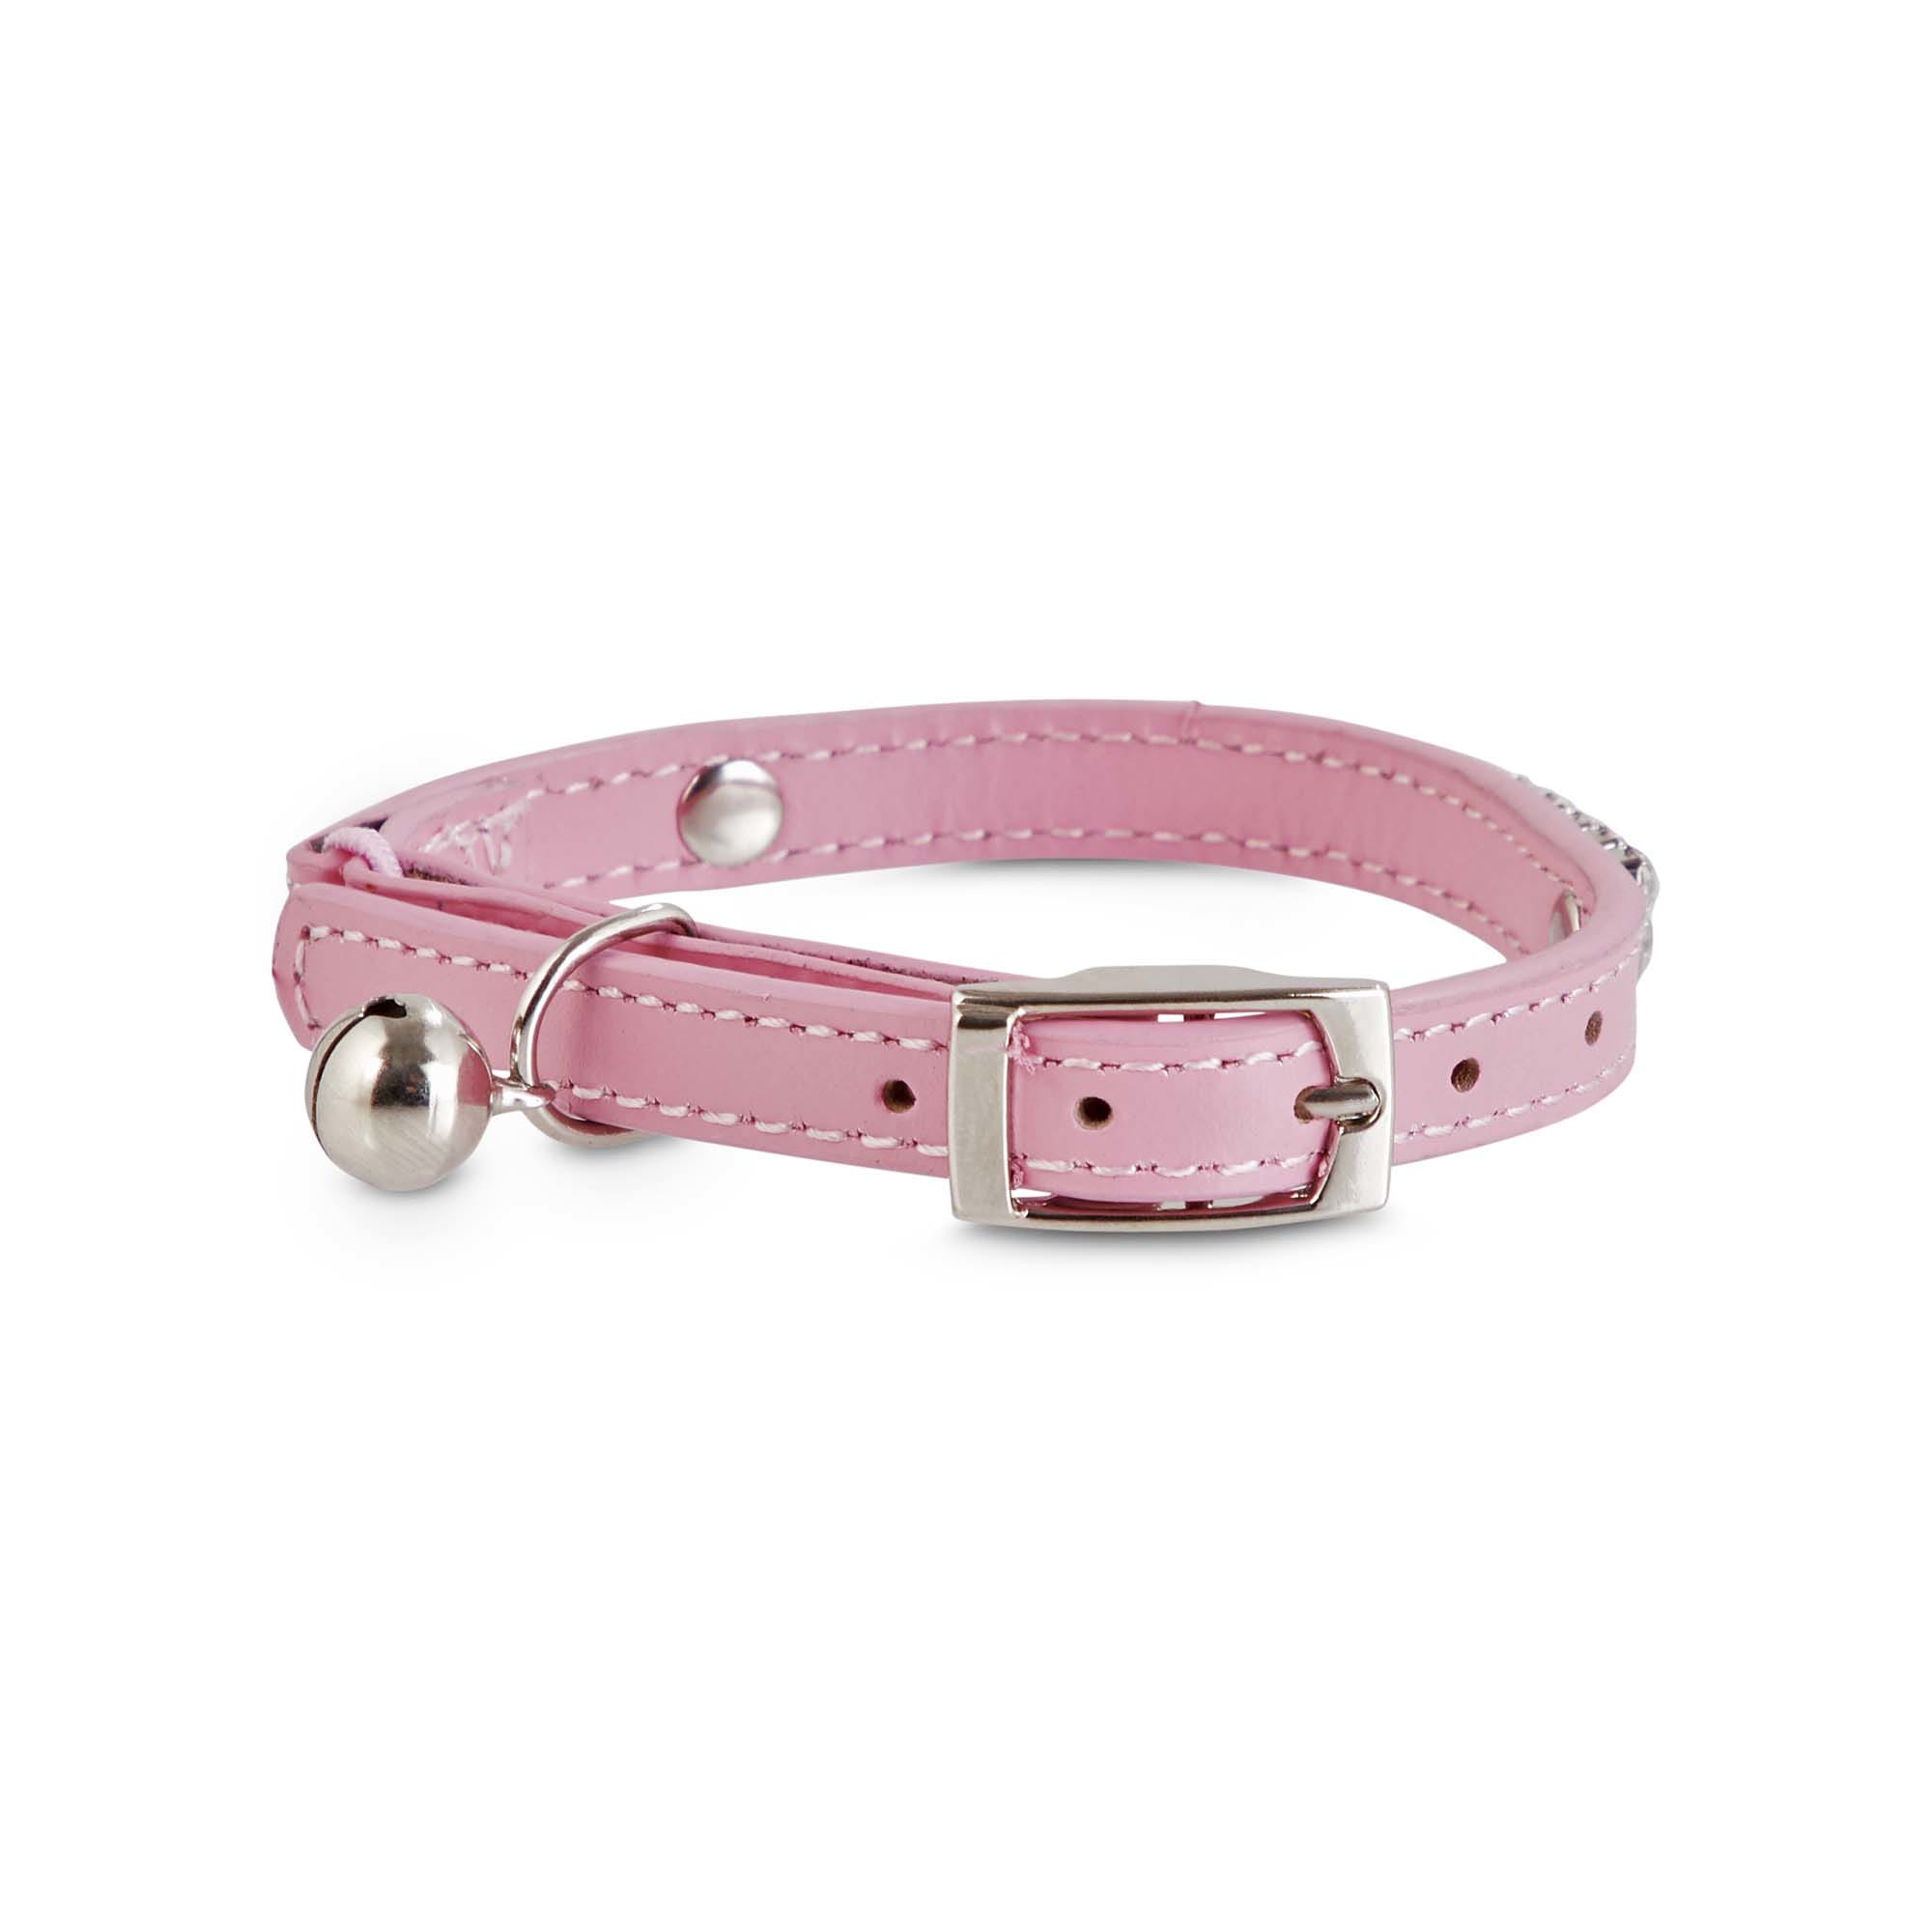 Bejeweled Pink Leather with Safety Stretch Cat Collar Bond & Co 